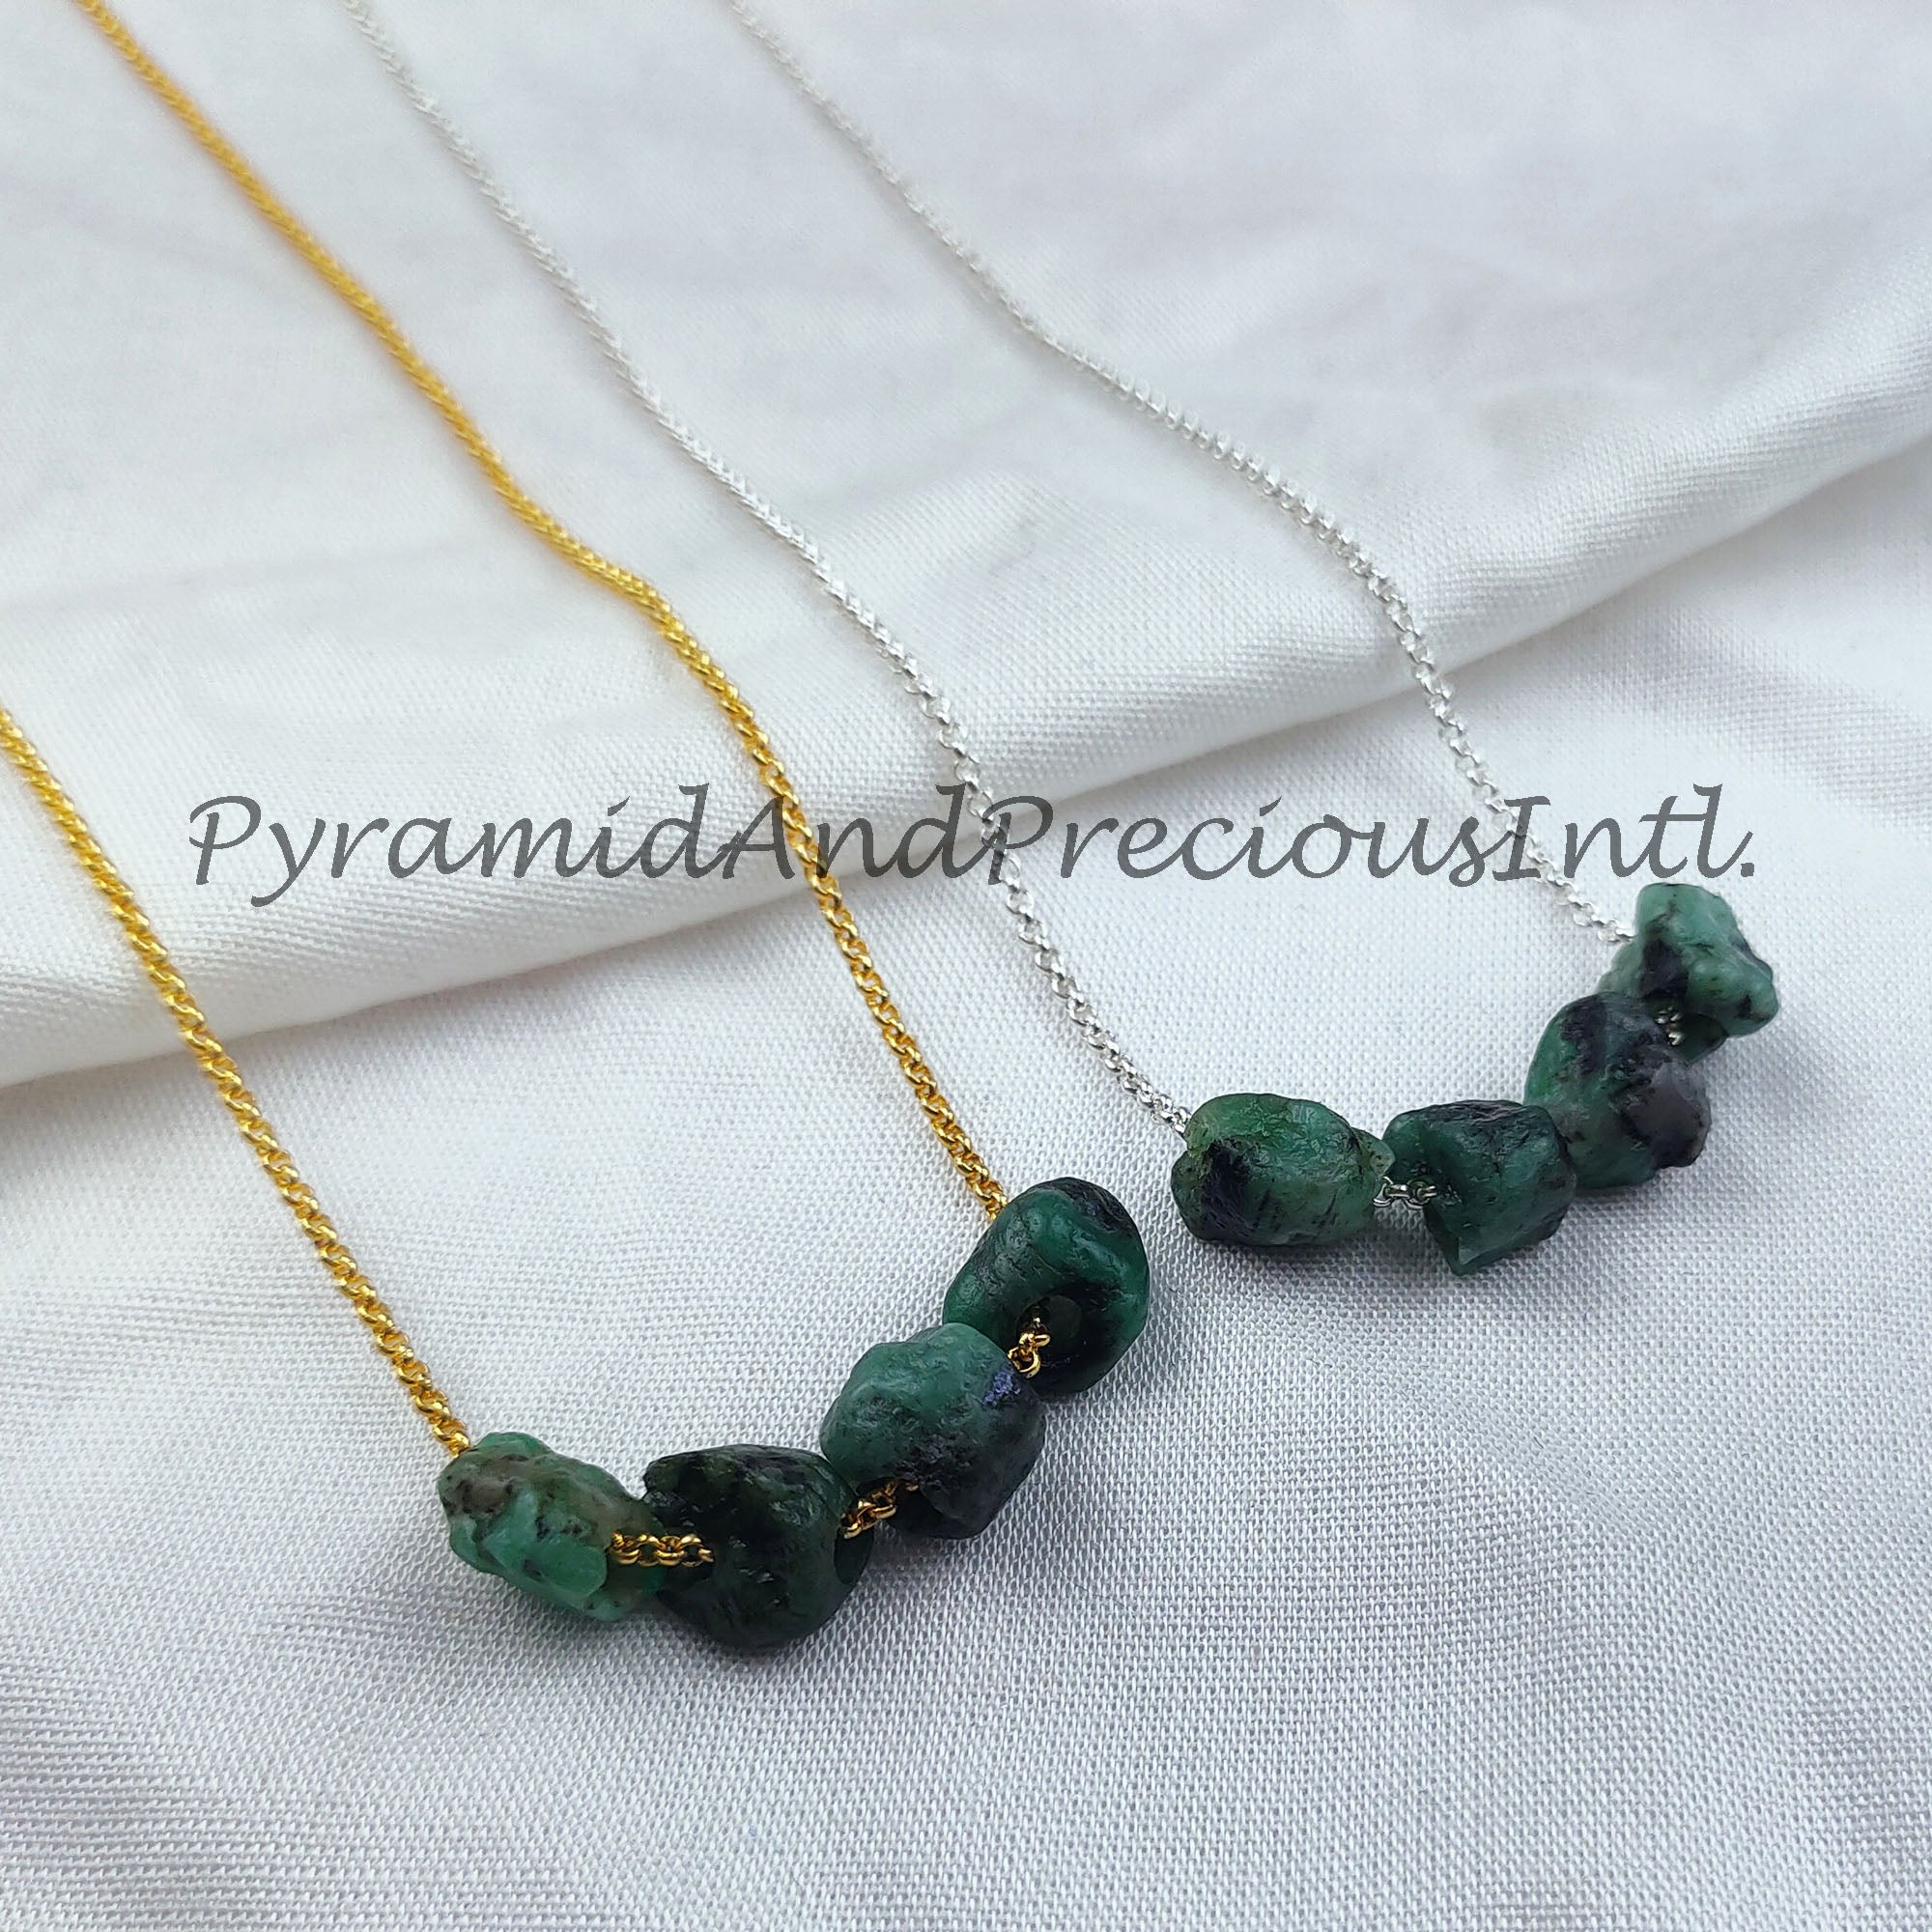 Natural Raw Emerald Necklace, Healing Necklace, May Birthstone, Green Emerald Necklace, Gift For Girlfriend